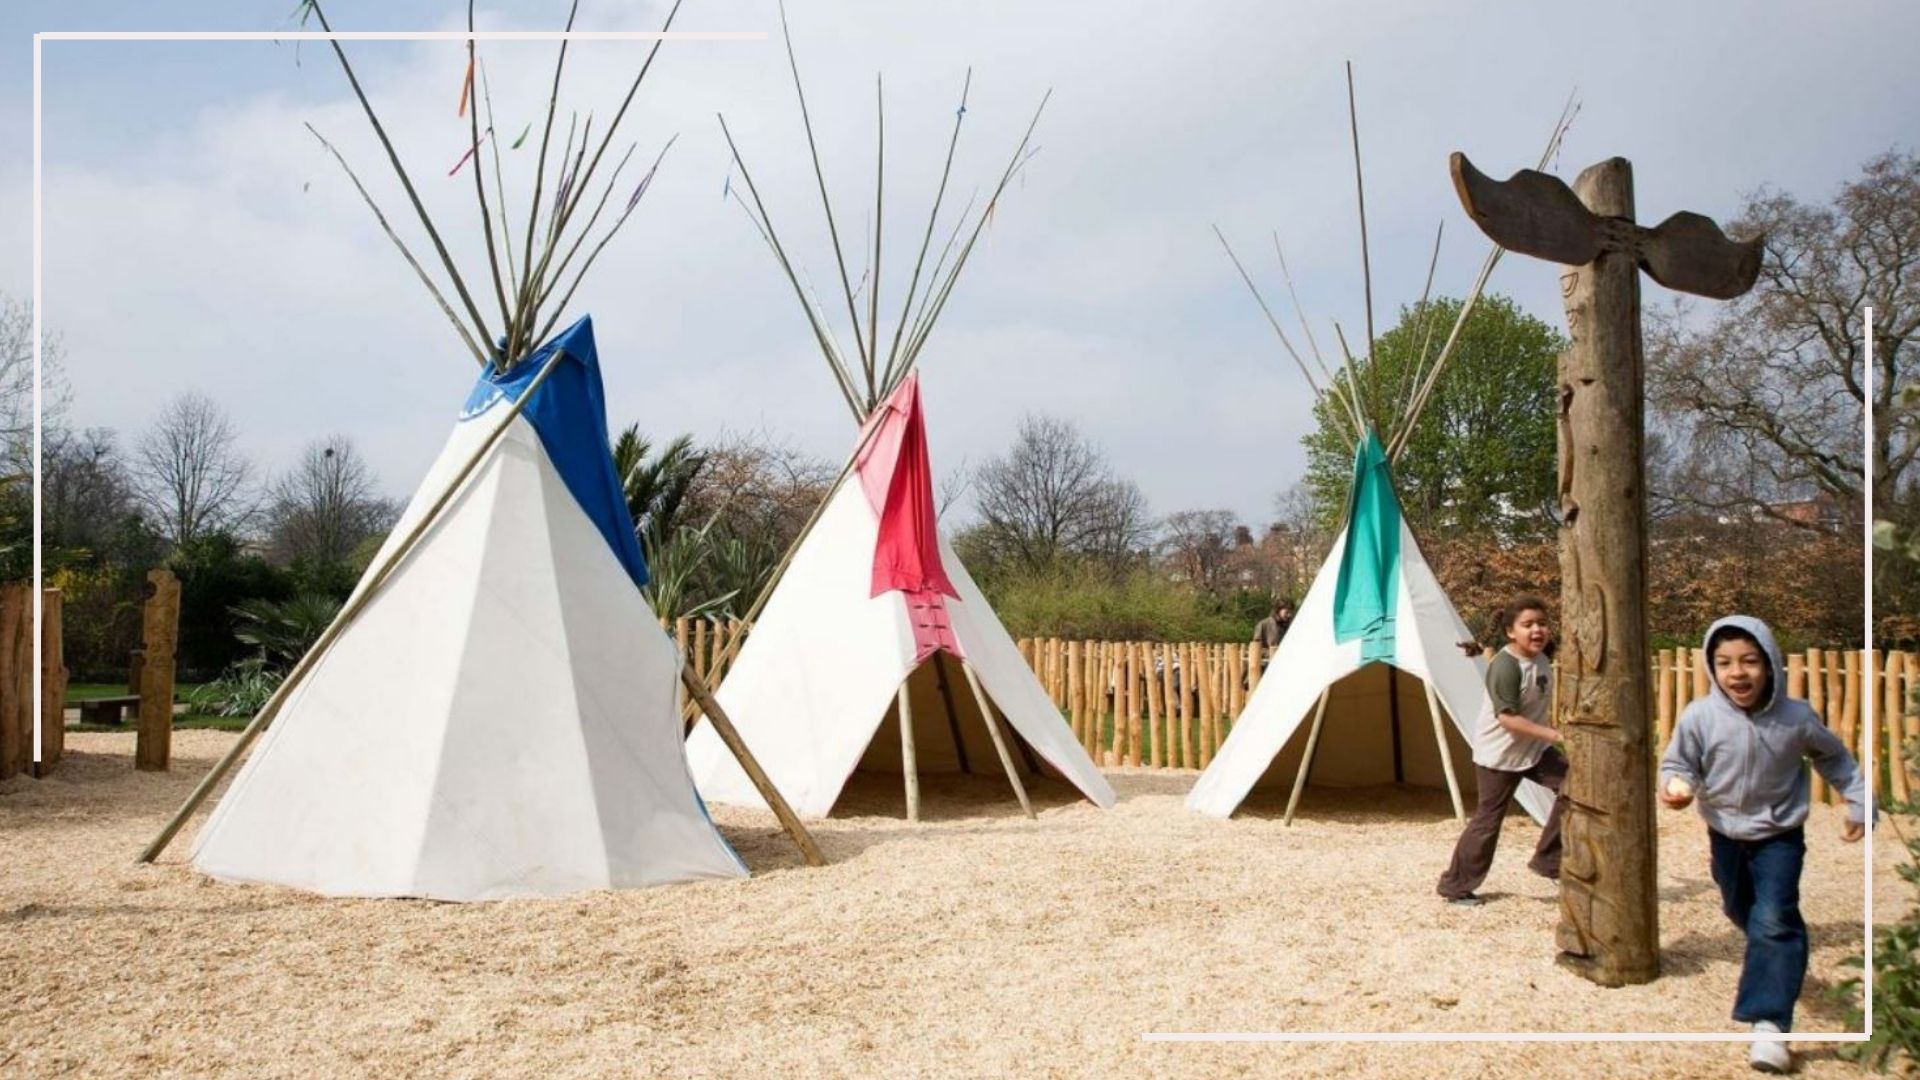 Image of teepees at Diana, Princess of Wales' Memorial Playground as part of free things to do in London